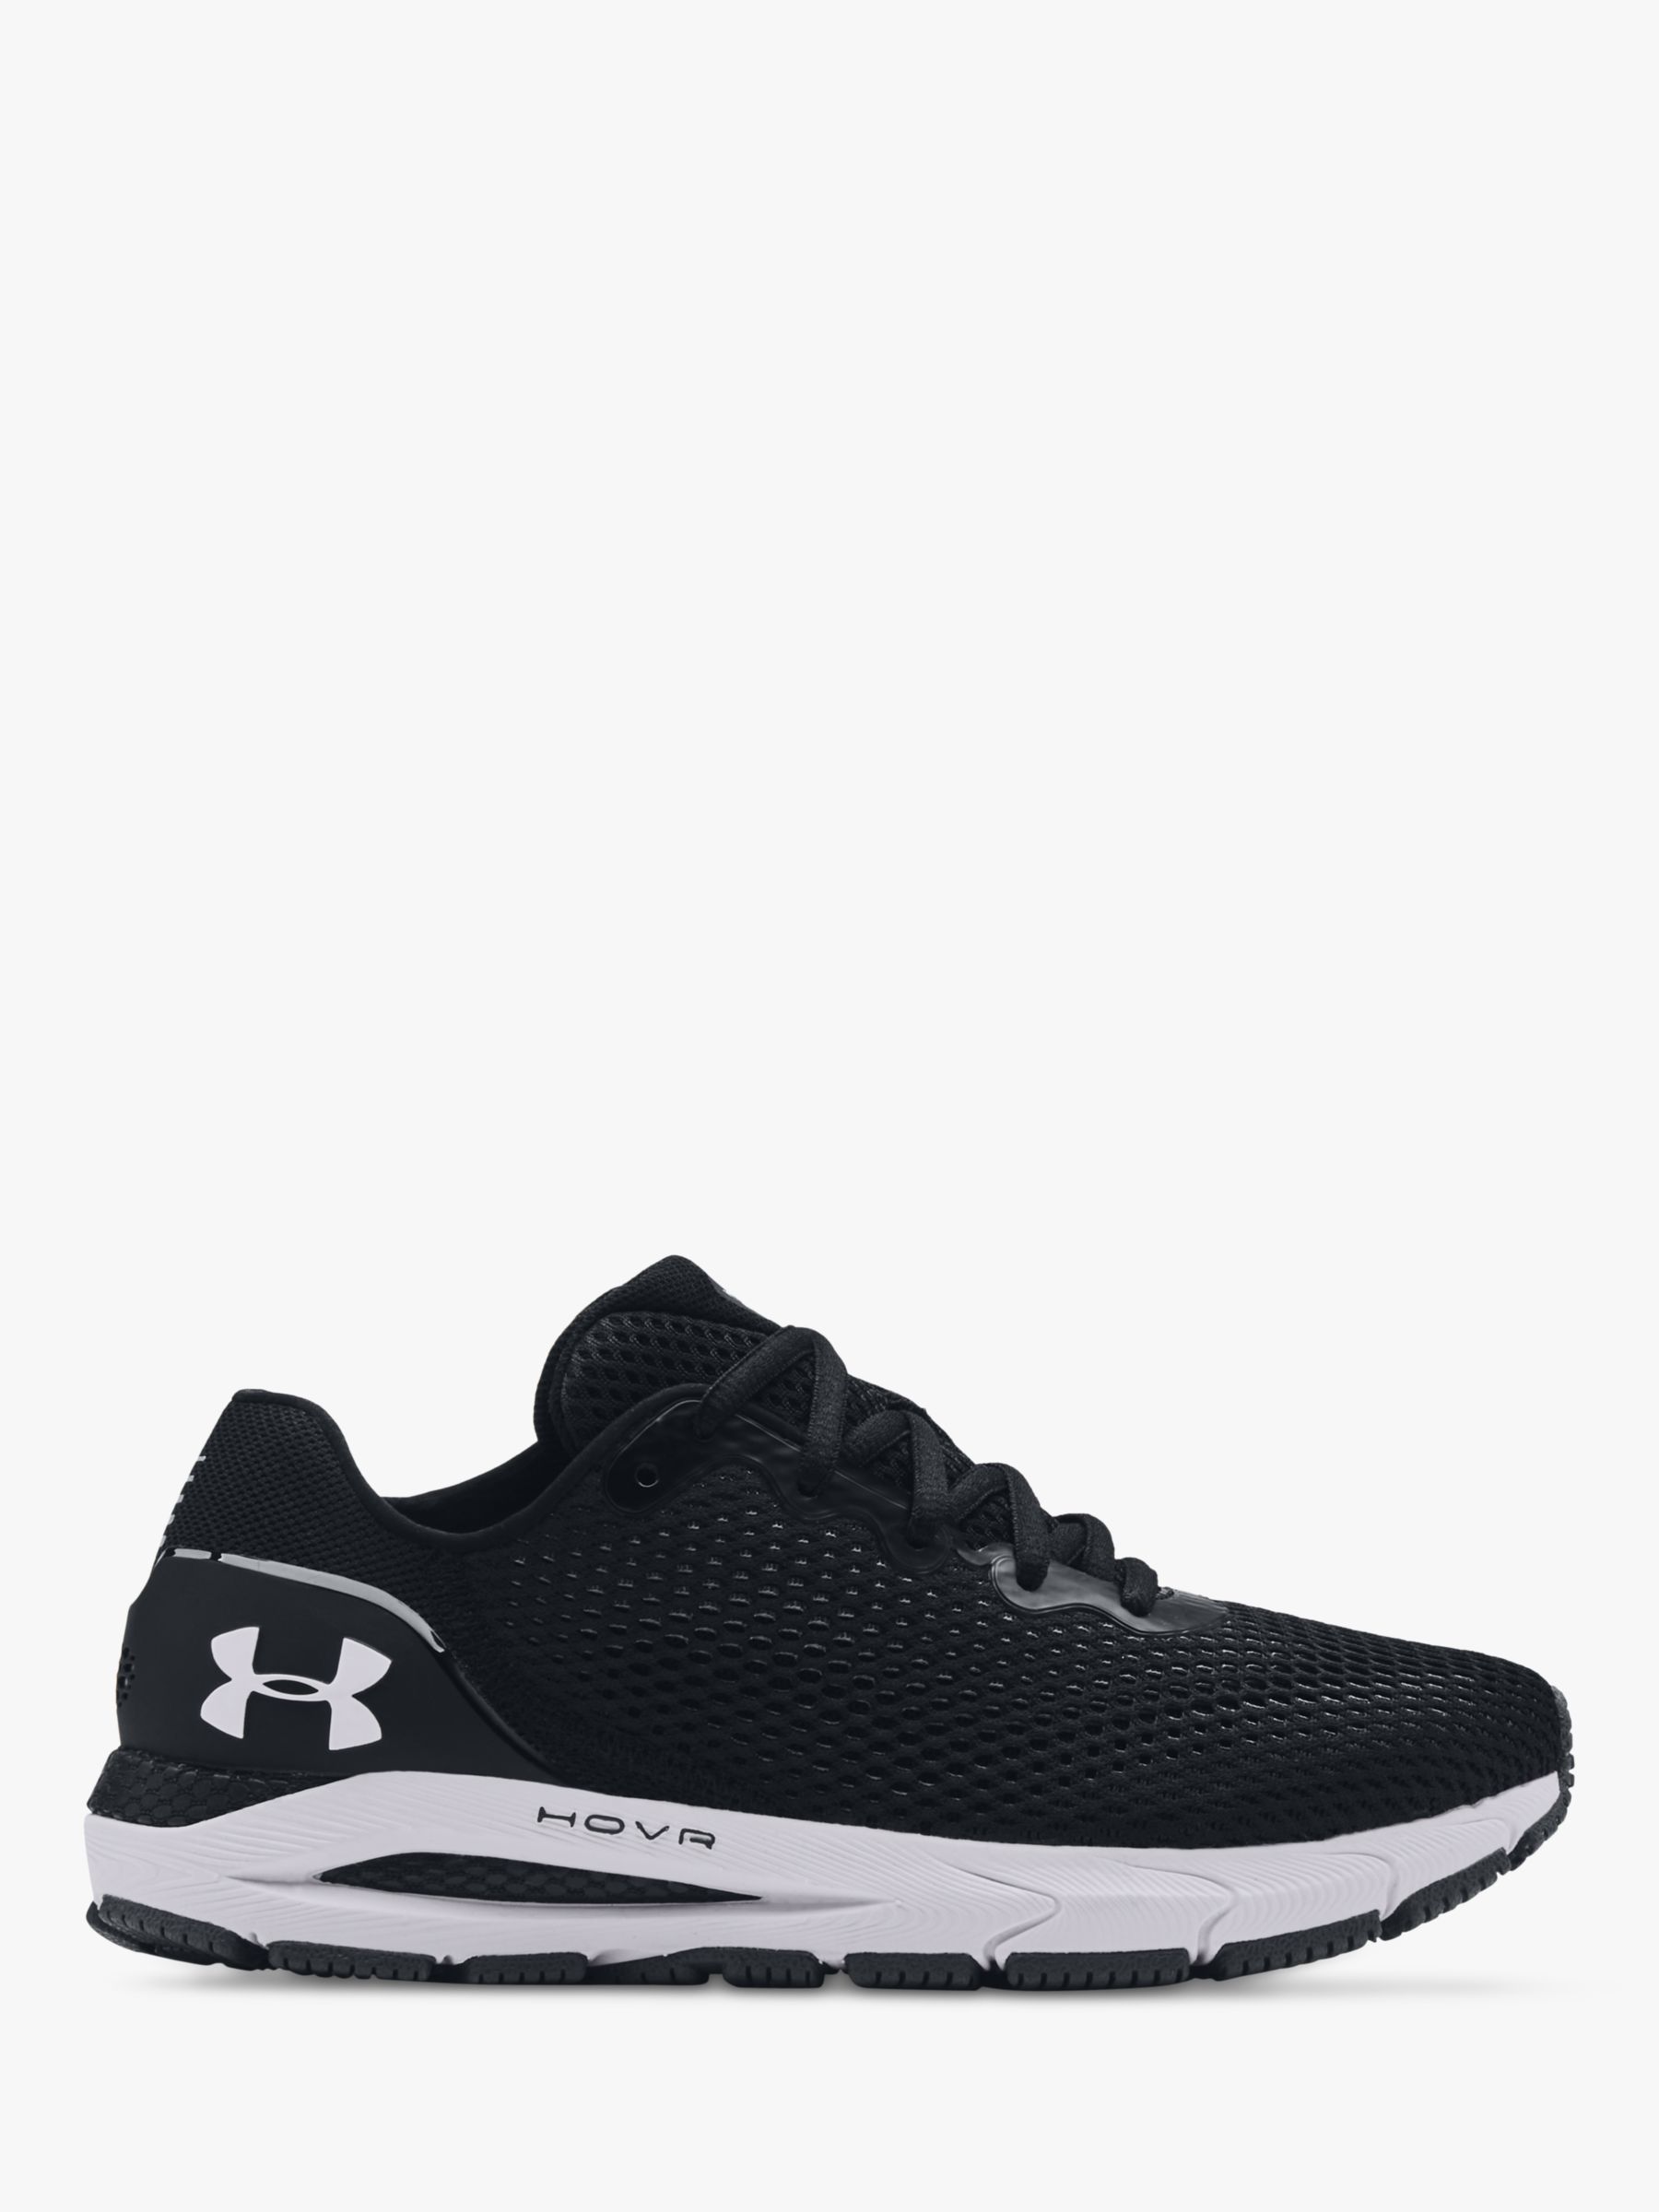 Under Armour HOVR Sonic 4 Women's Running Shoes at John Lewis & Partners